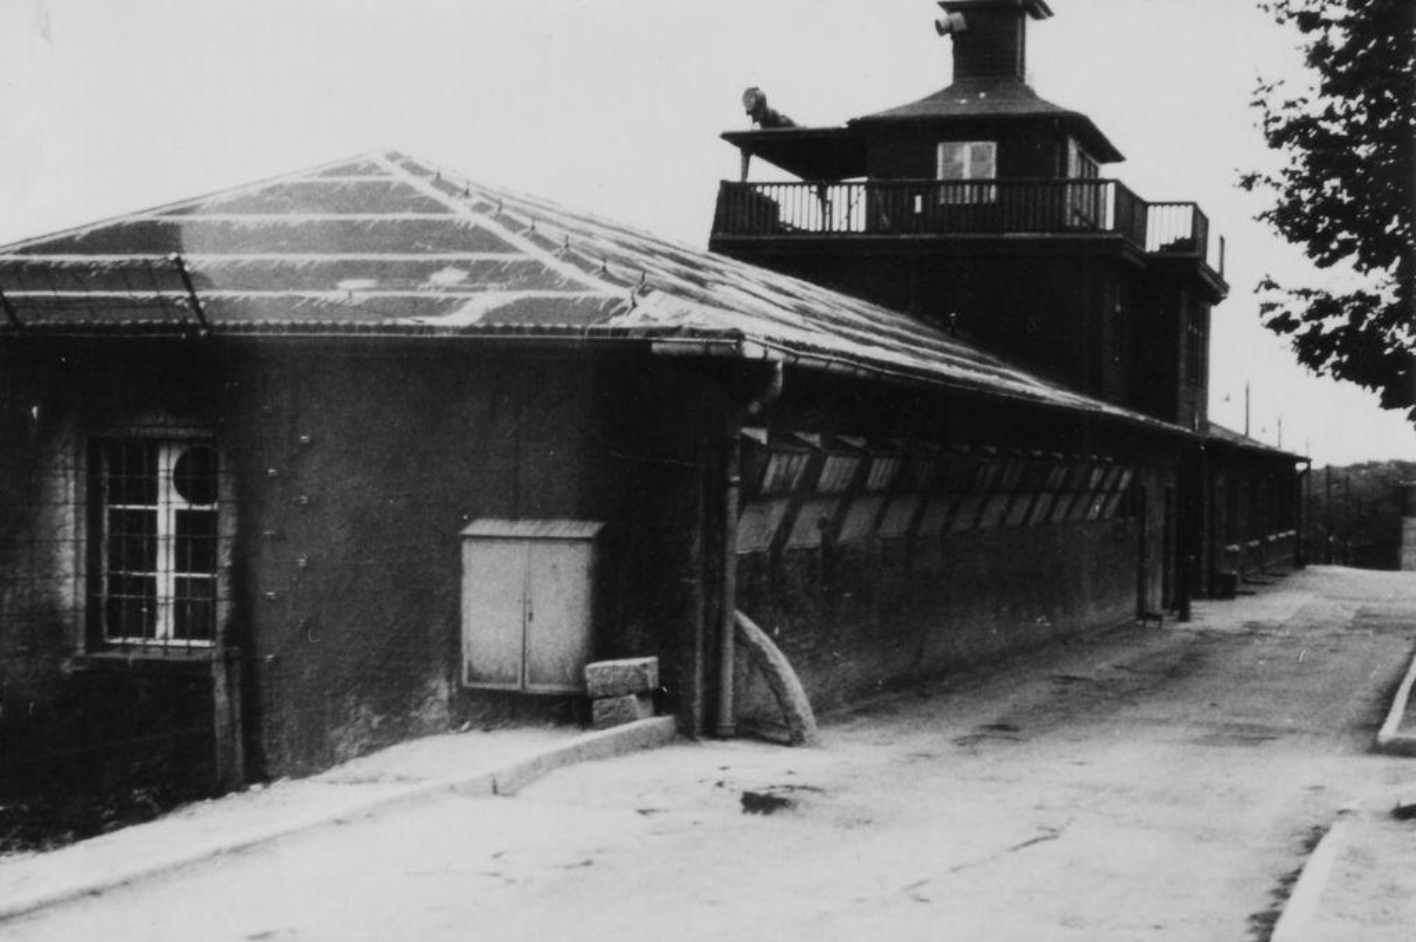 In front on the left is the detention cell building in the right wing of the gate building. In the center is the main watchtower above the camp gate. Behind it is the left wing of the gate building.